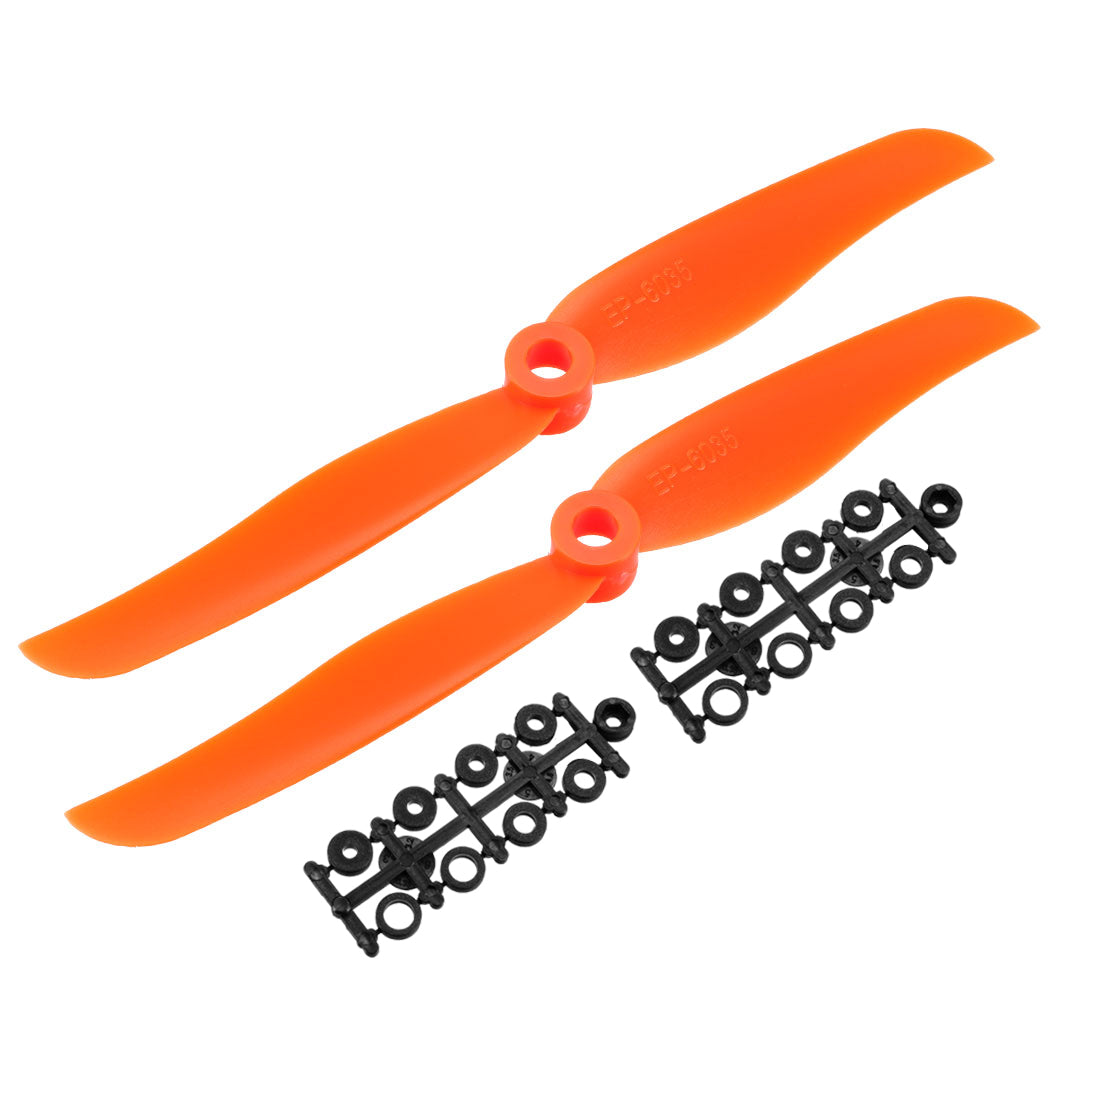 uxcell Uxcell RC Propellers  6035 6x3.5 Inch 2-Vane Fixed-Wing for Airplane Toy, Nylon Orange 2pcs with Adapter Rings